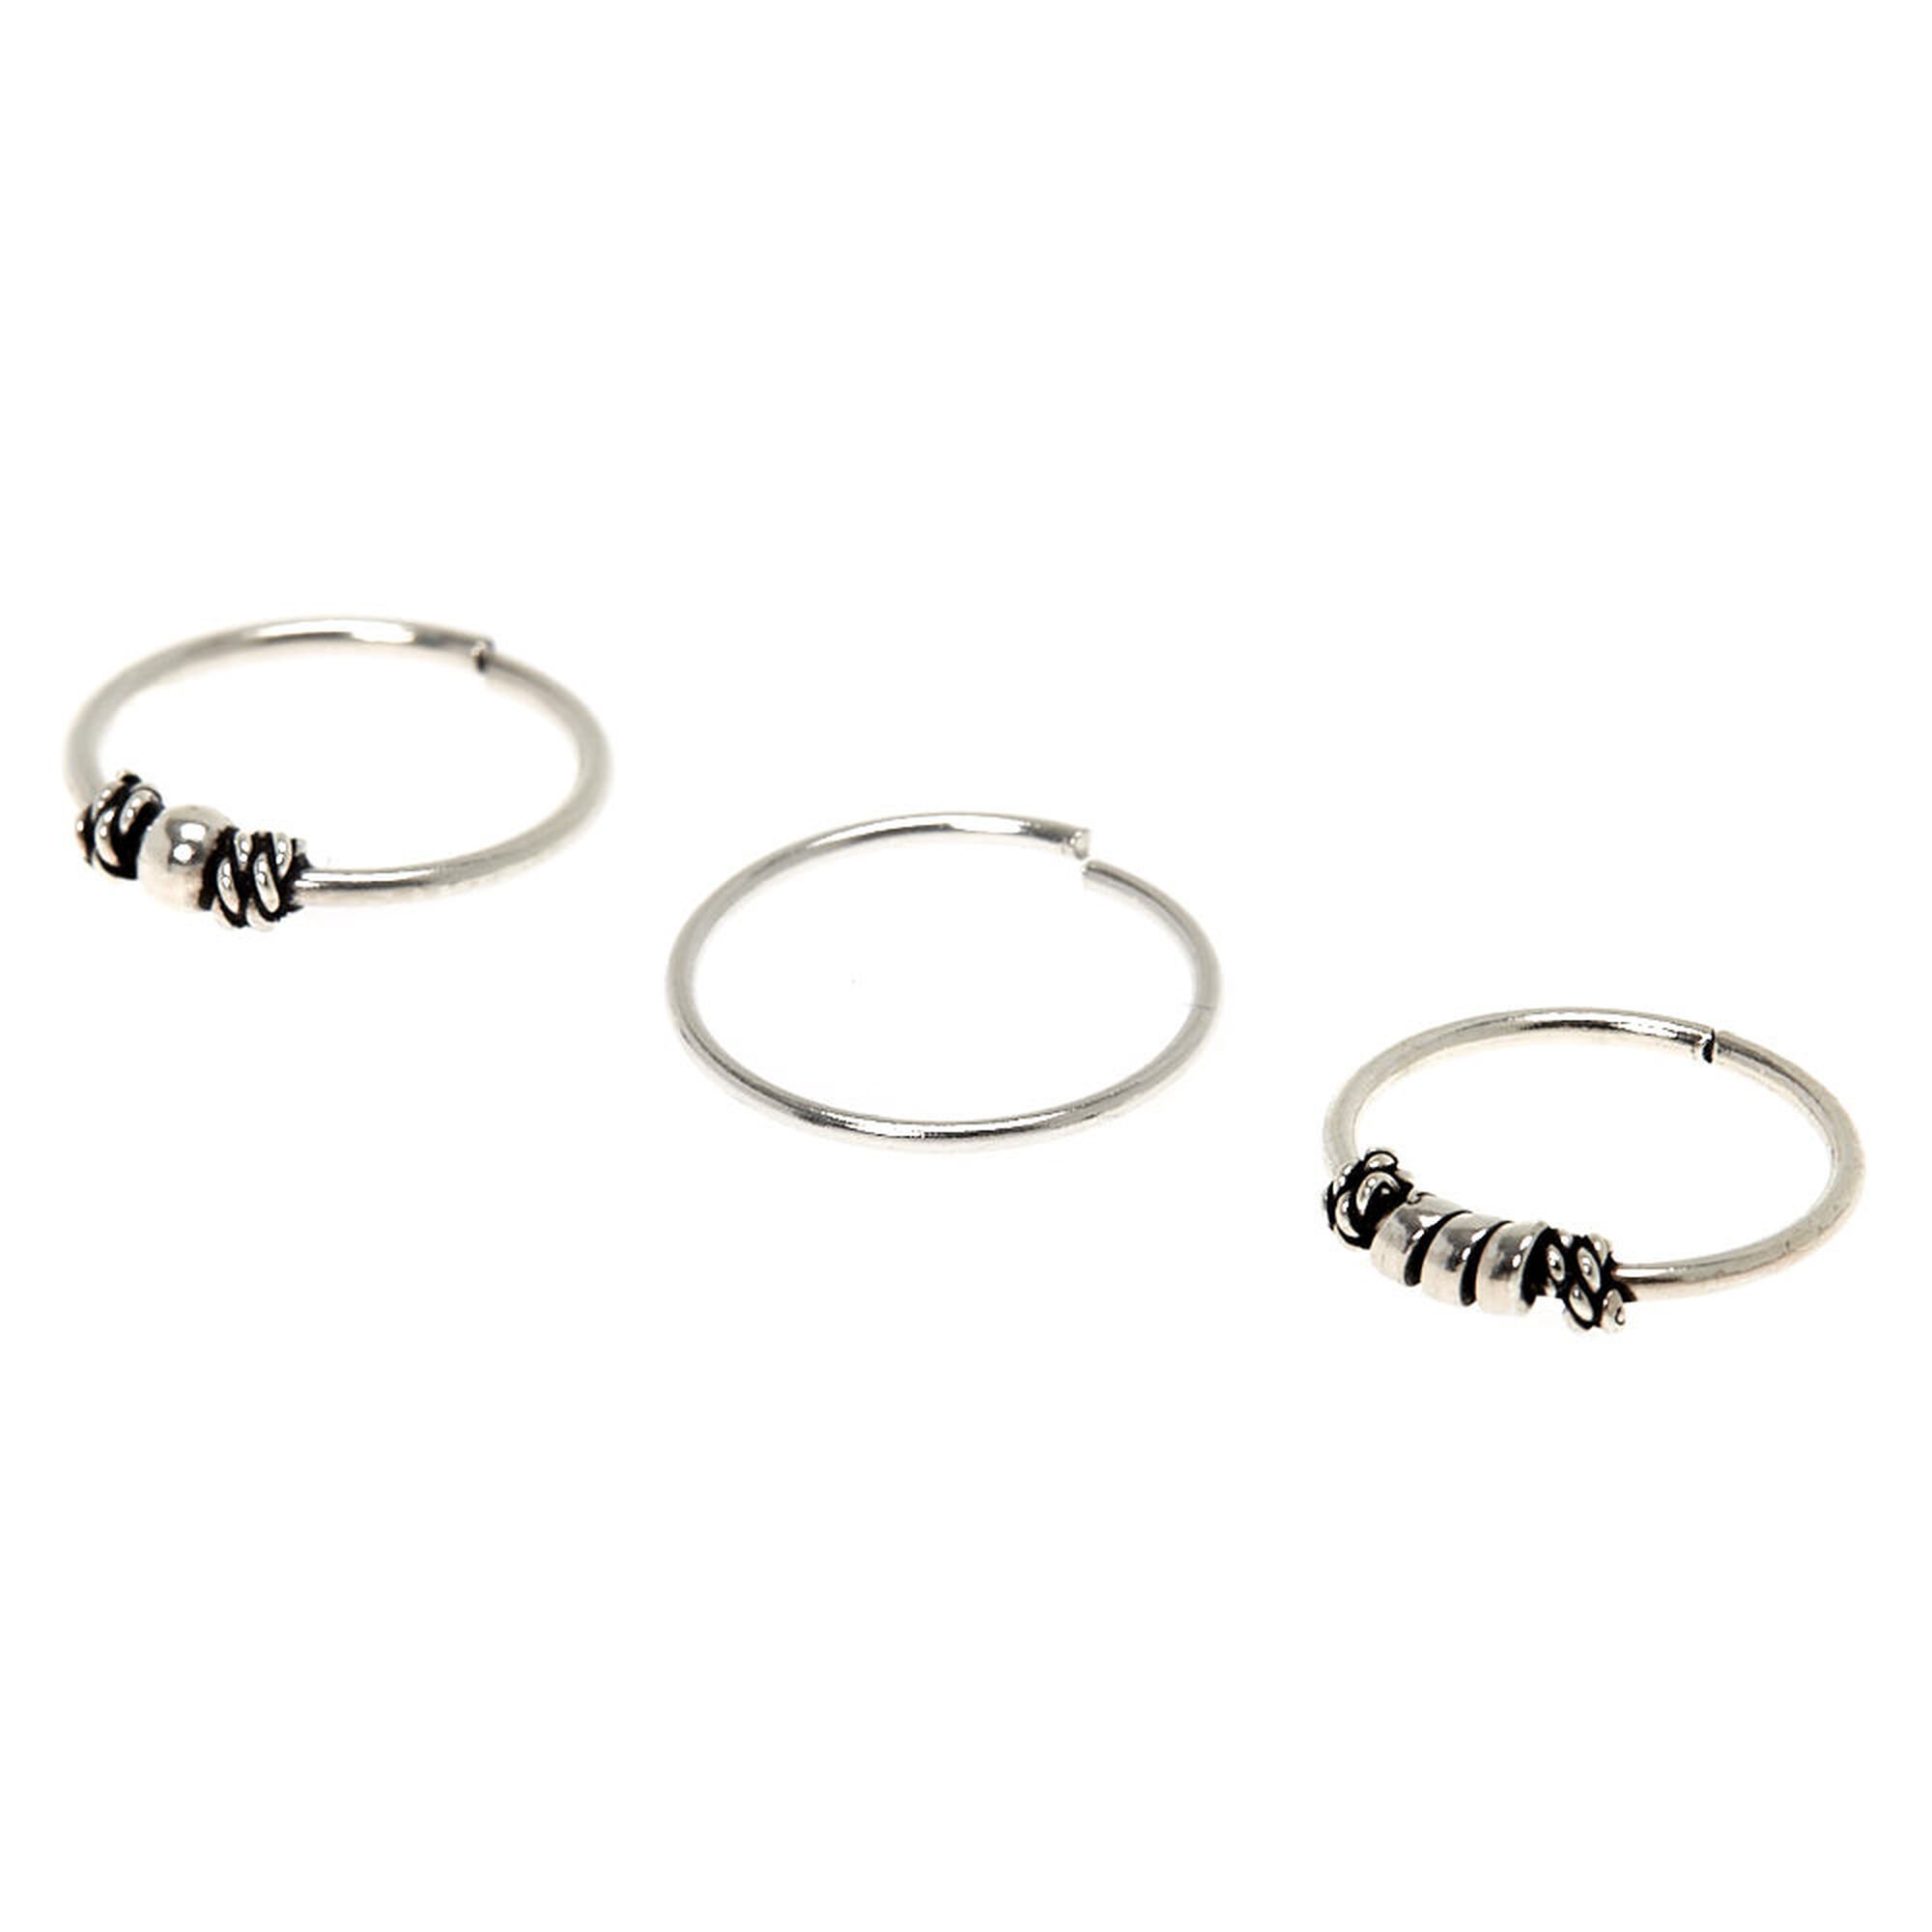 View Claires 21G Bali Beaded Hoop Nose Rings 3 Pack Silver information